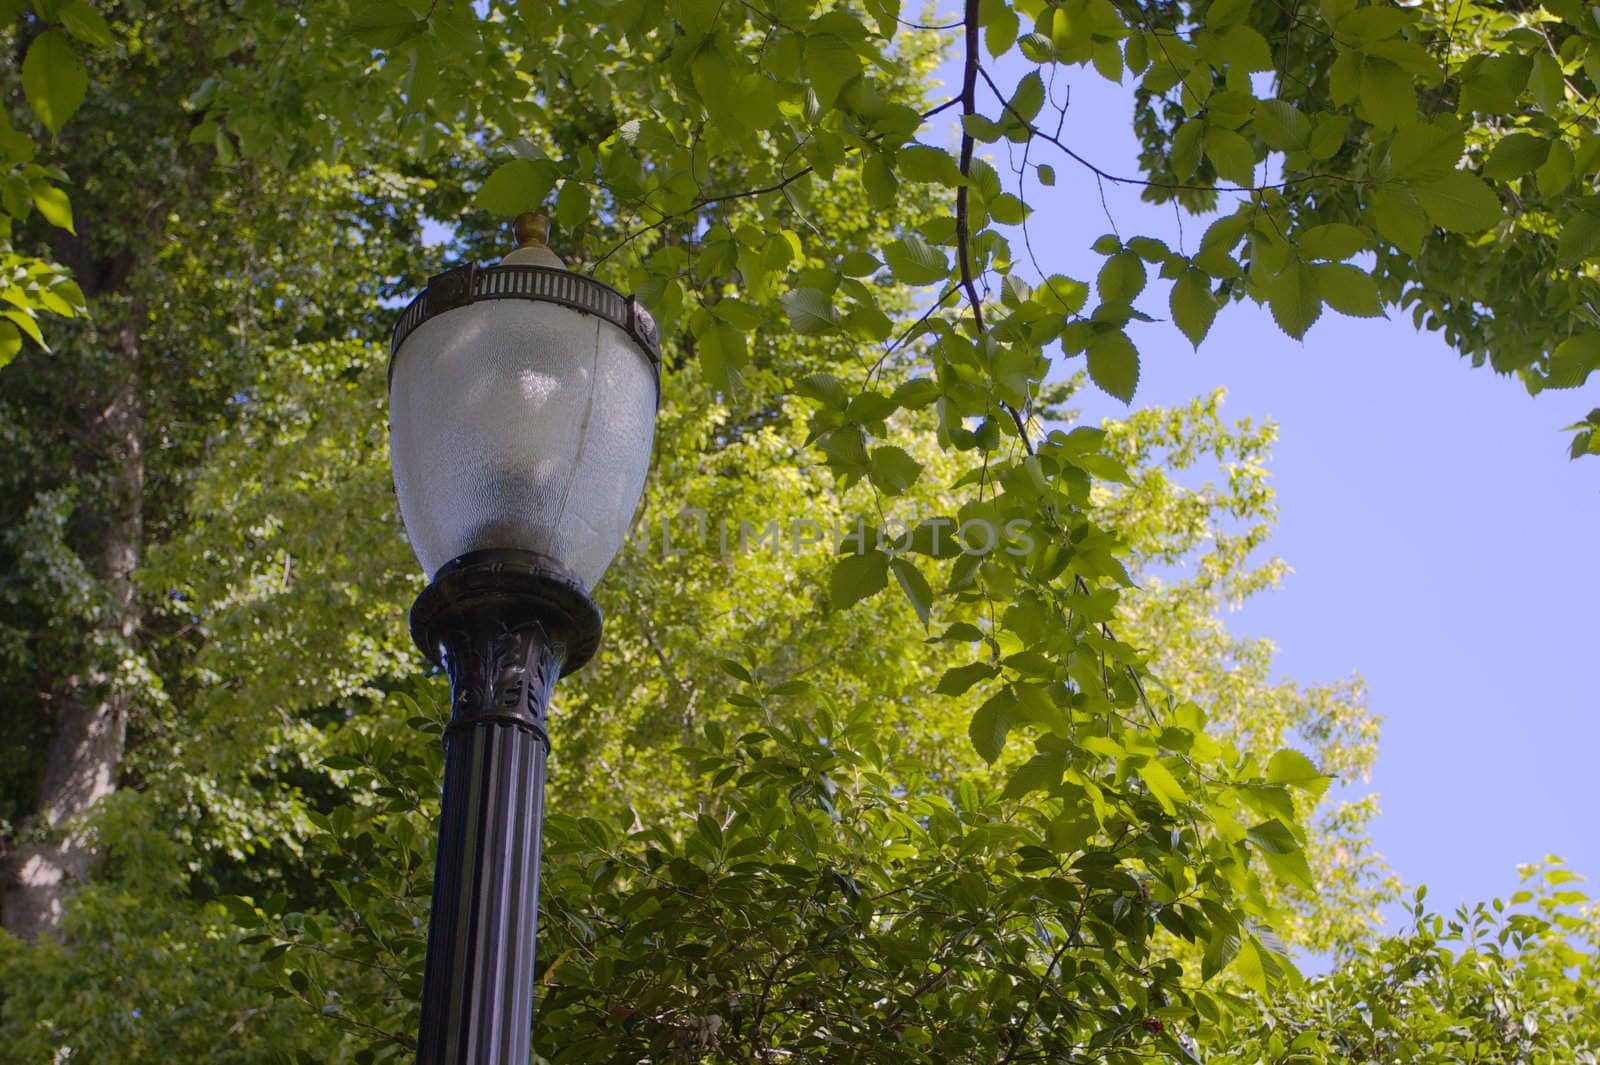 Lamppost in a park by bobkeenan